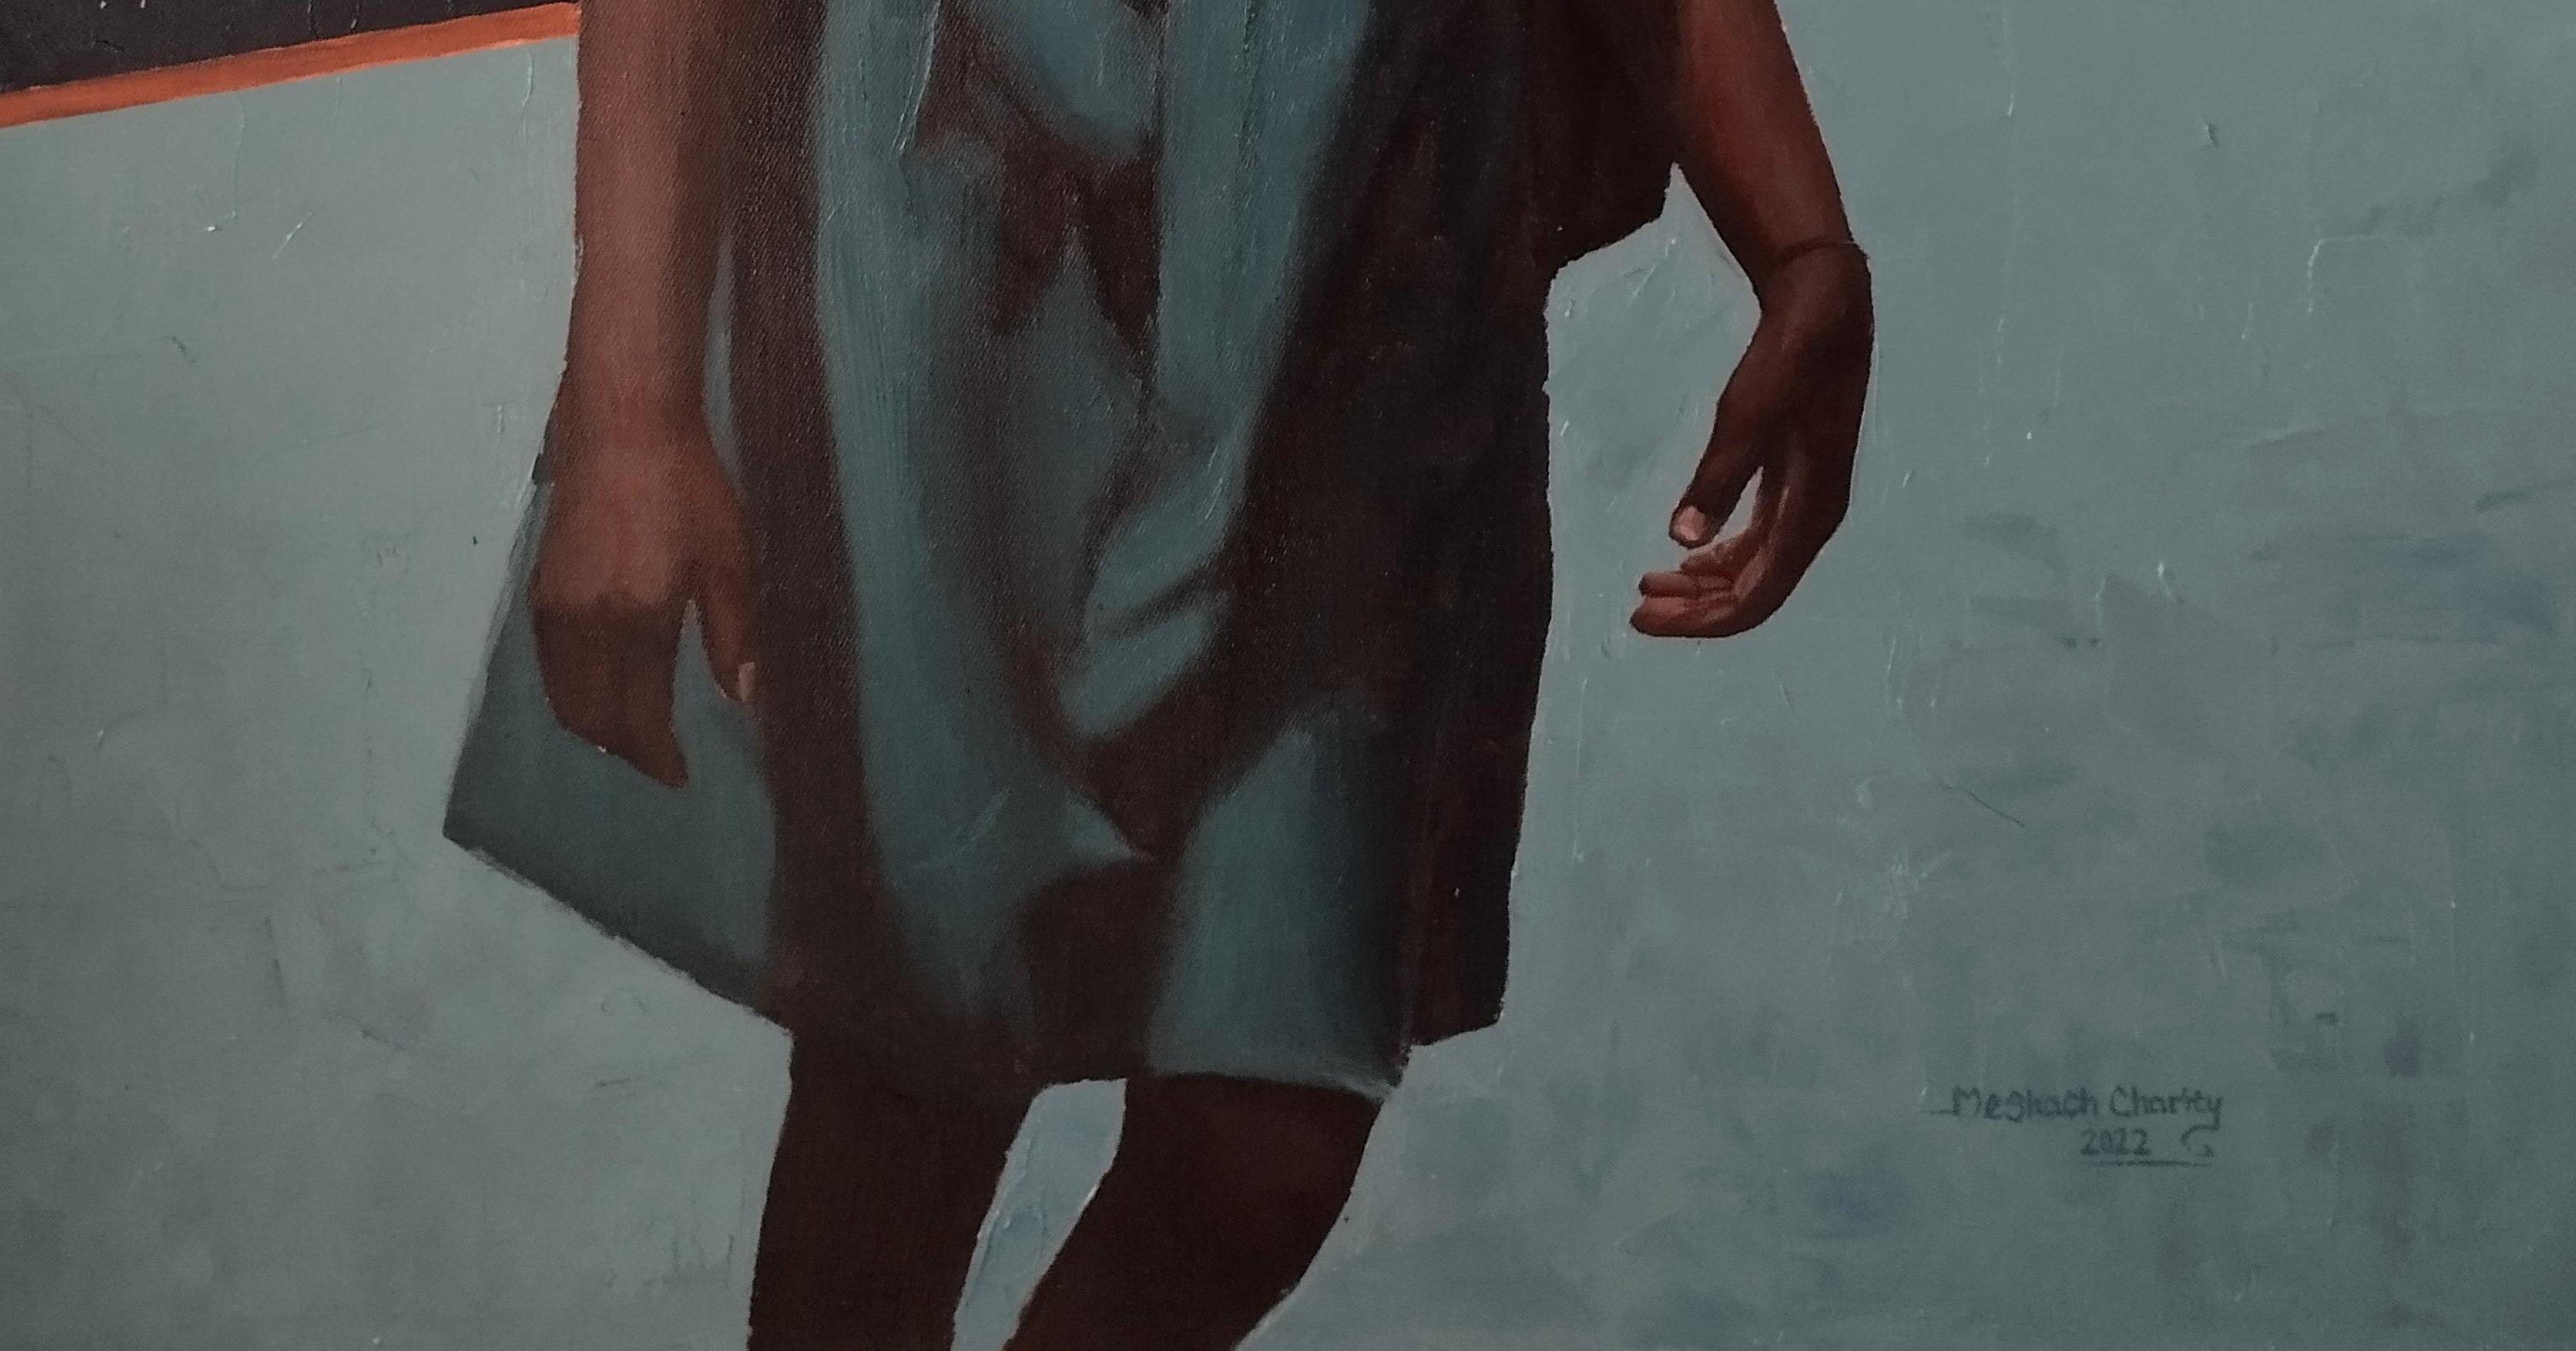 When Life Seems Blurry - Black Figurative Painting by Meshach Charity